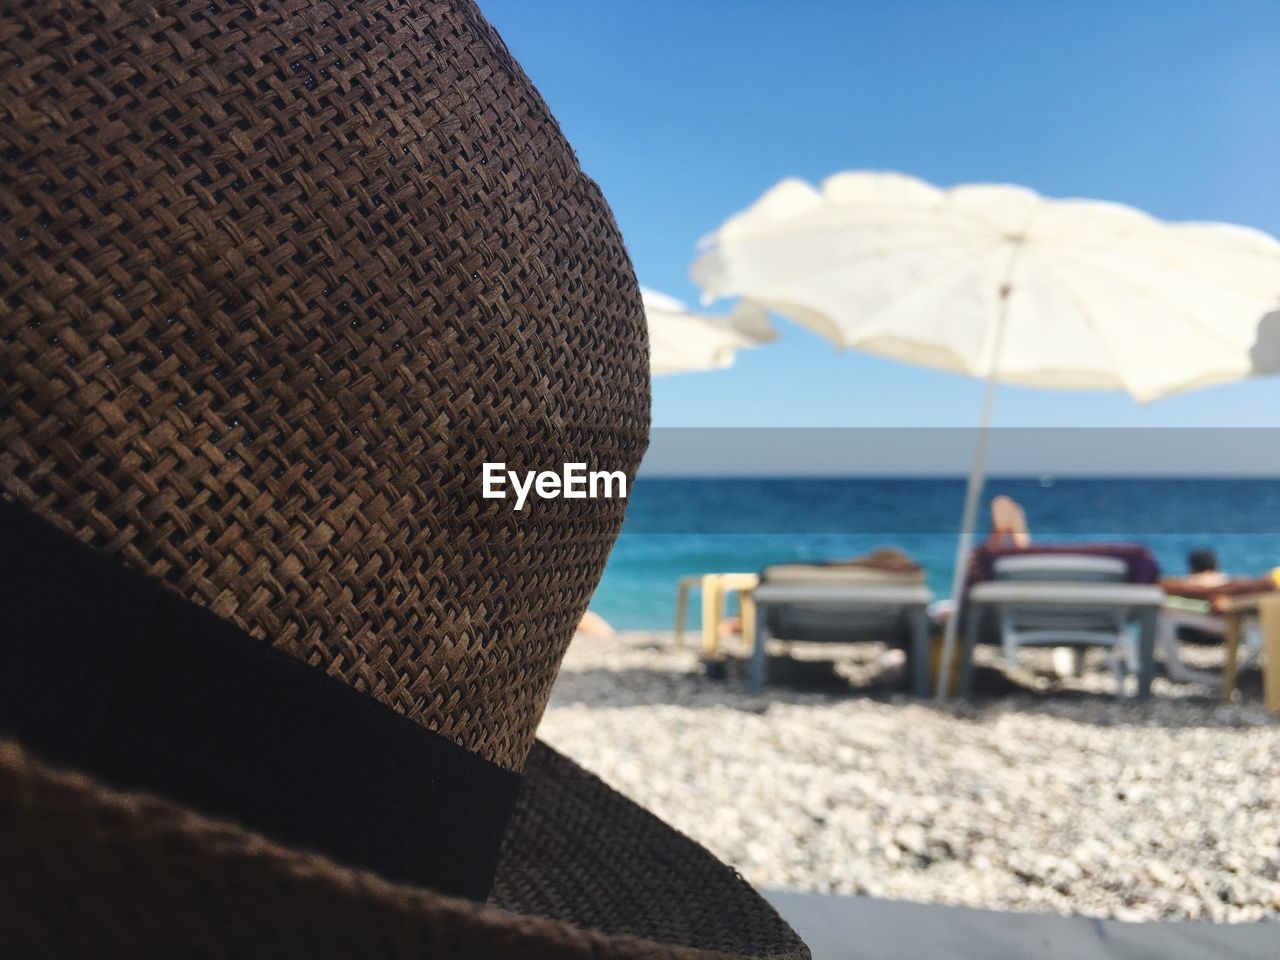 Close-up of sun hat at beach against sky